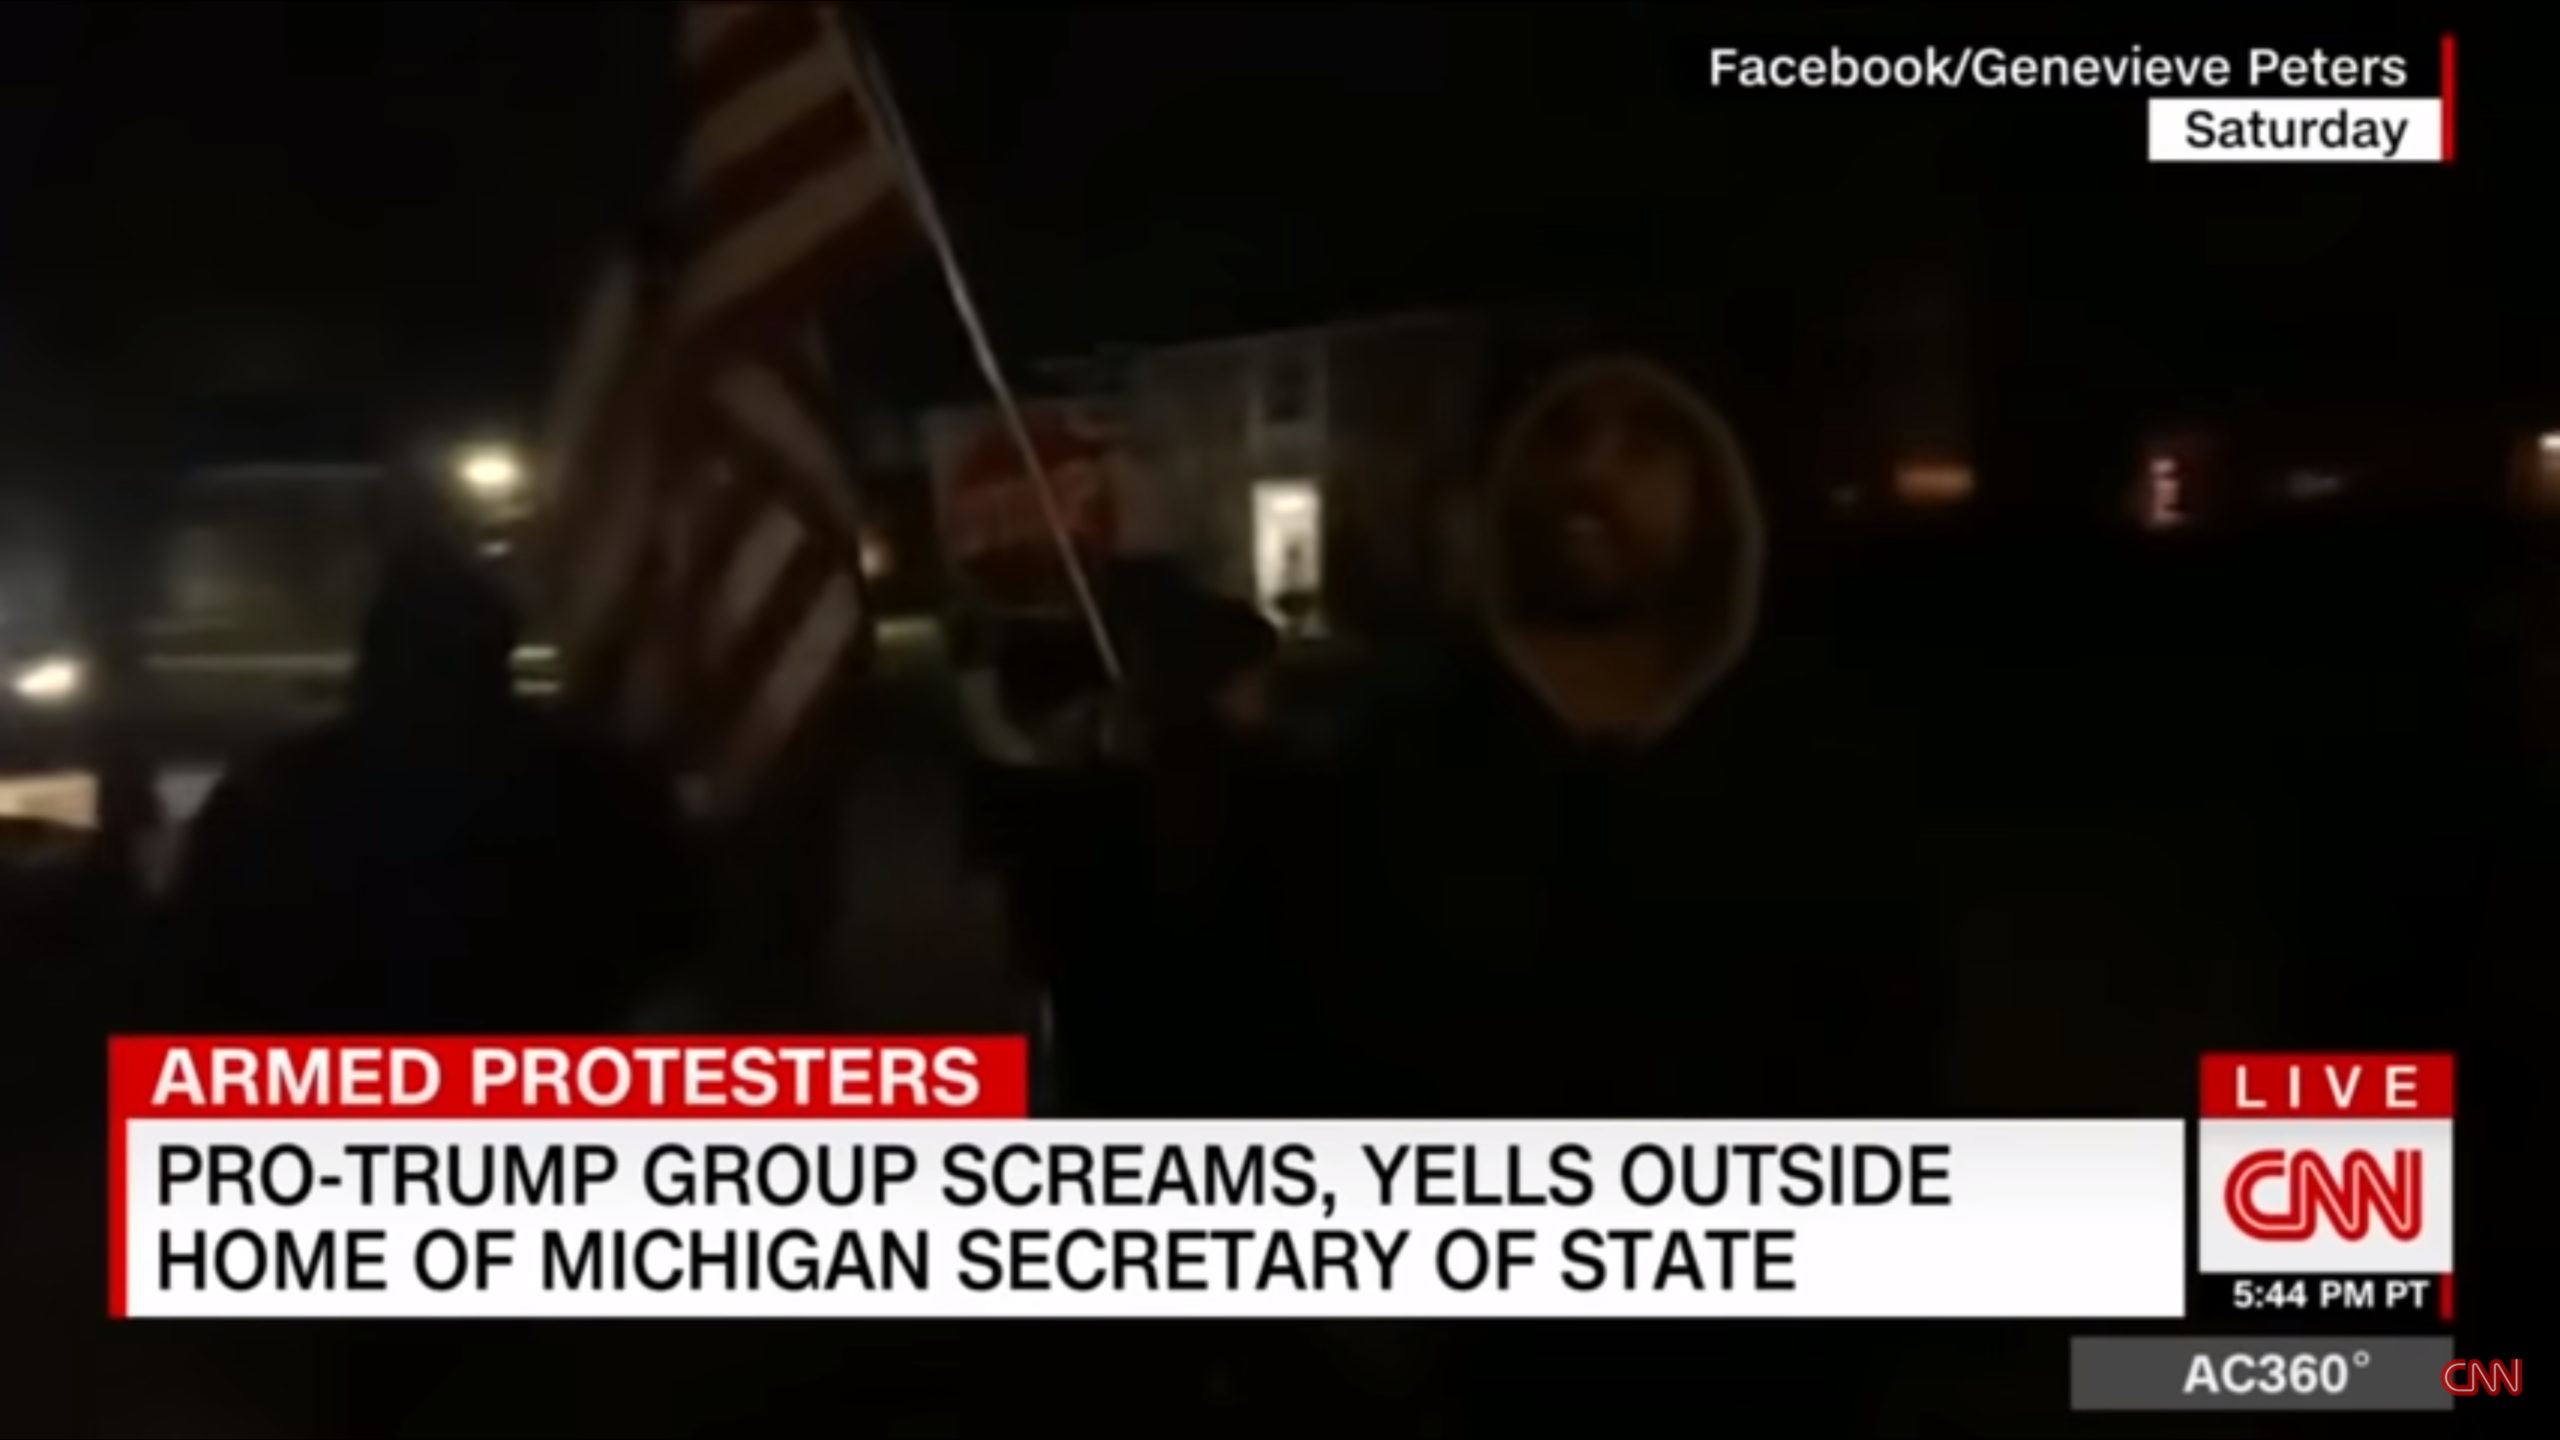 Armed Trump coup supporters surround the home of Michigan Secretary of State Jocelyn Benson on 5 December 2020, as part of an organized harassment and intimidation campaign planned by convicted felon Bernard Kerik and other Trump insurrectionists. Photo: Genevieve Peters / Facebook / CNN